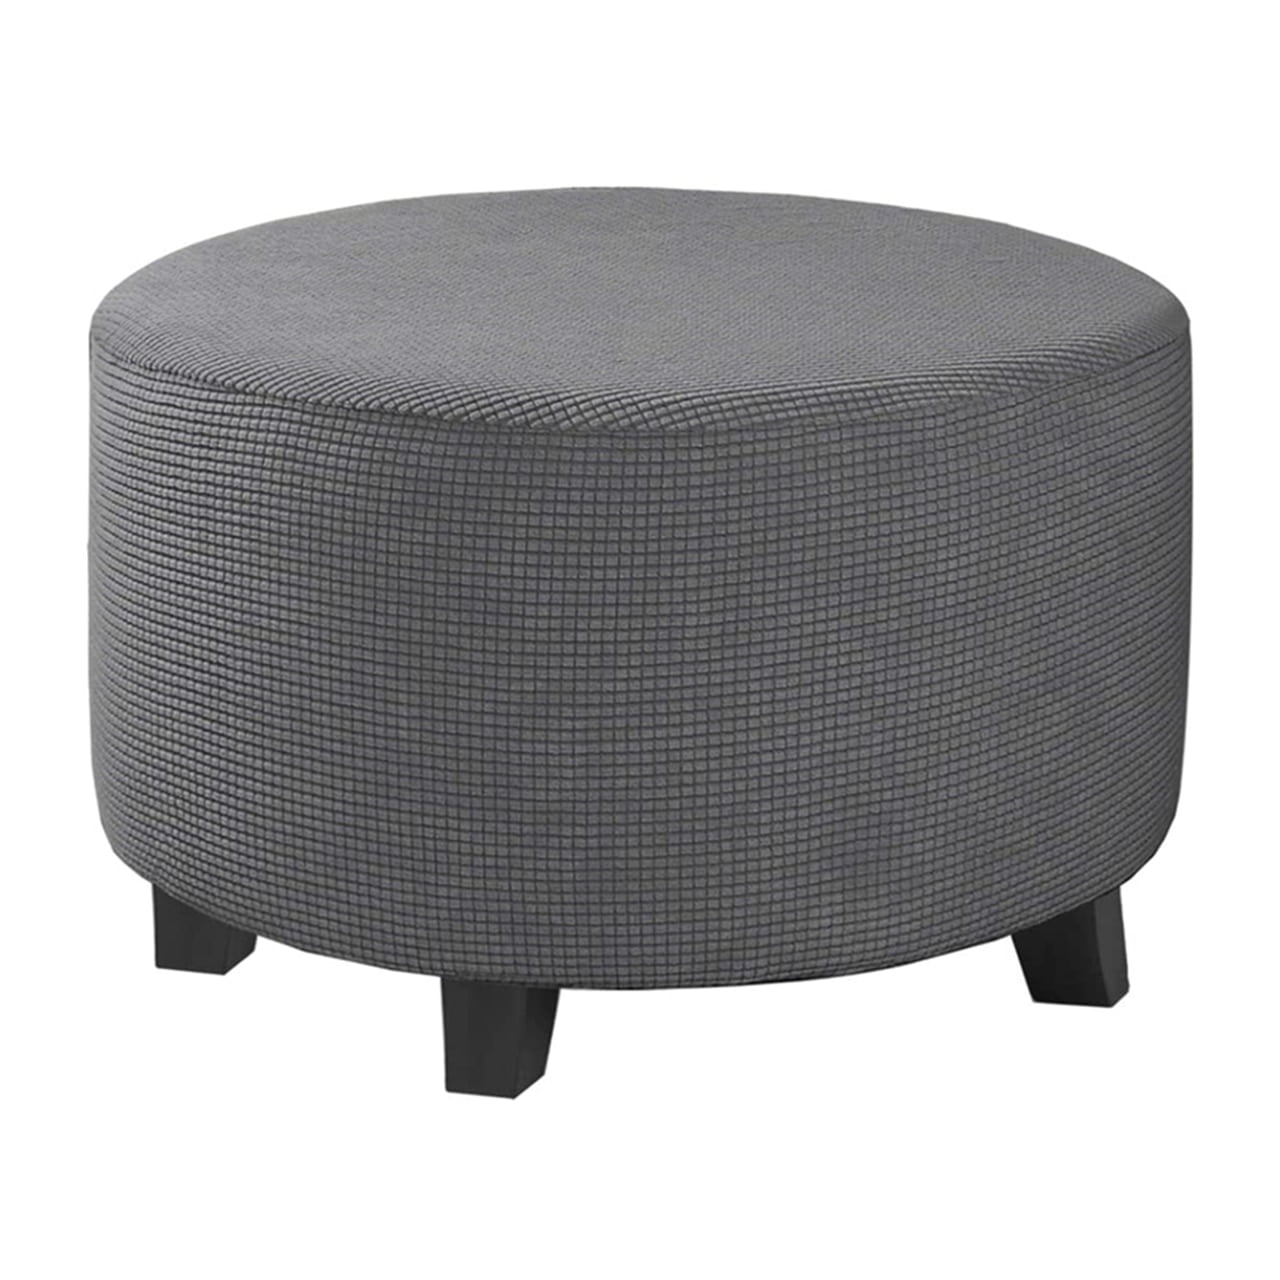 Details about   Elastic Foot Stool Slipcover Stretch Ottoman Rectangle Footstool Home Cover Case 